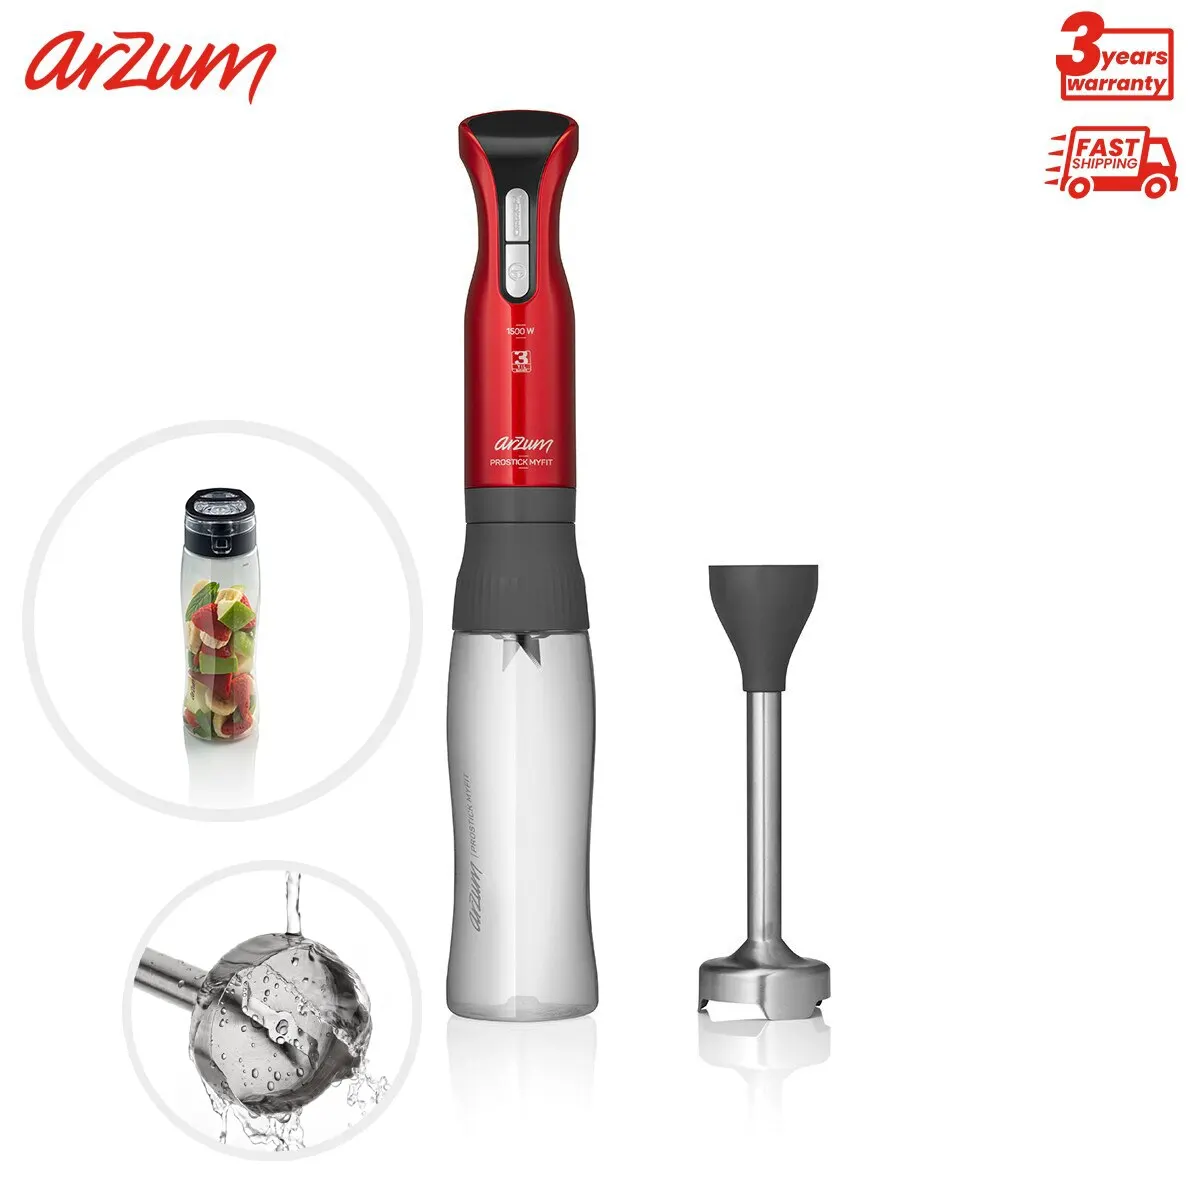 

My desire AR1091 Prostick Myfit Smoothie Hand Blender Set Portable Electric with Stainless Steel Blades Kitchen Tools Food Preparation